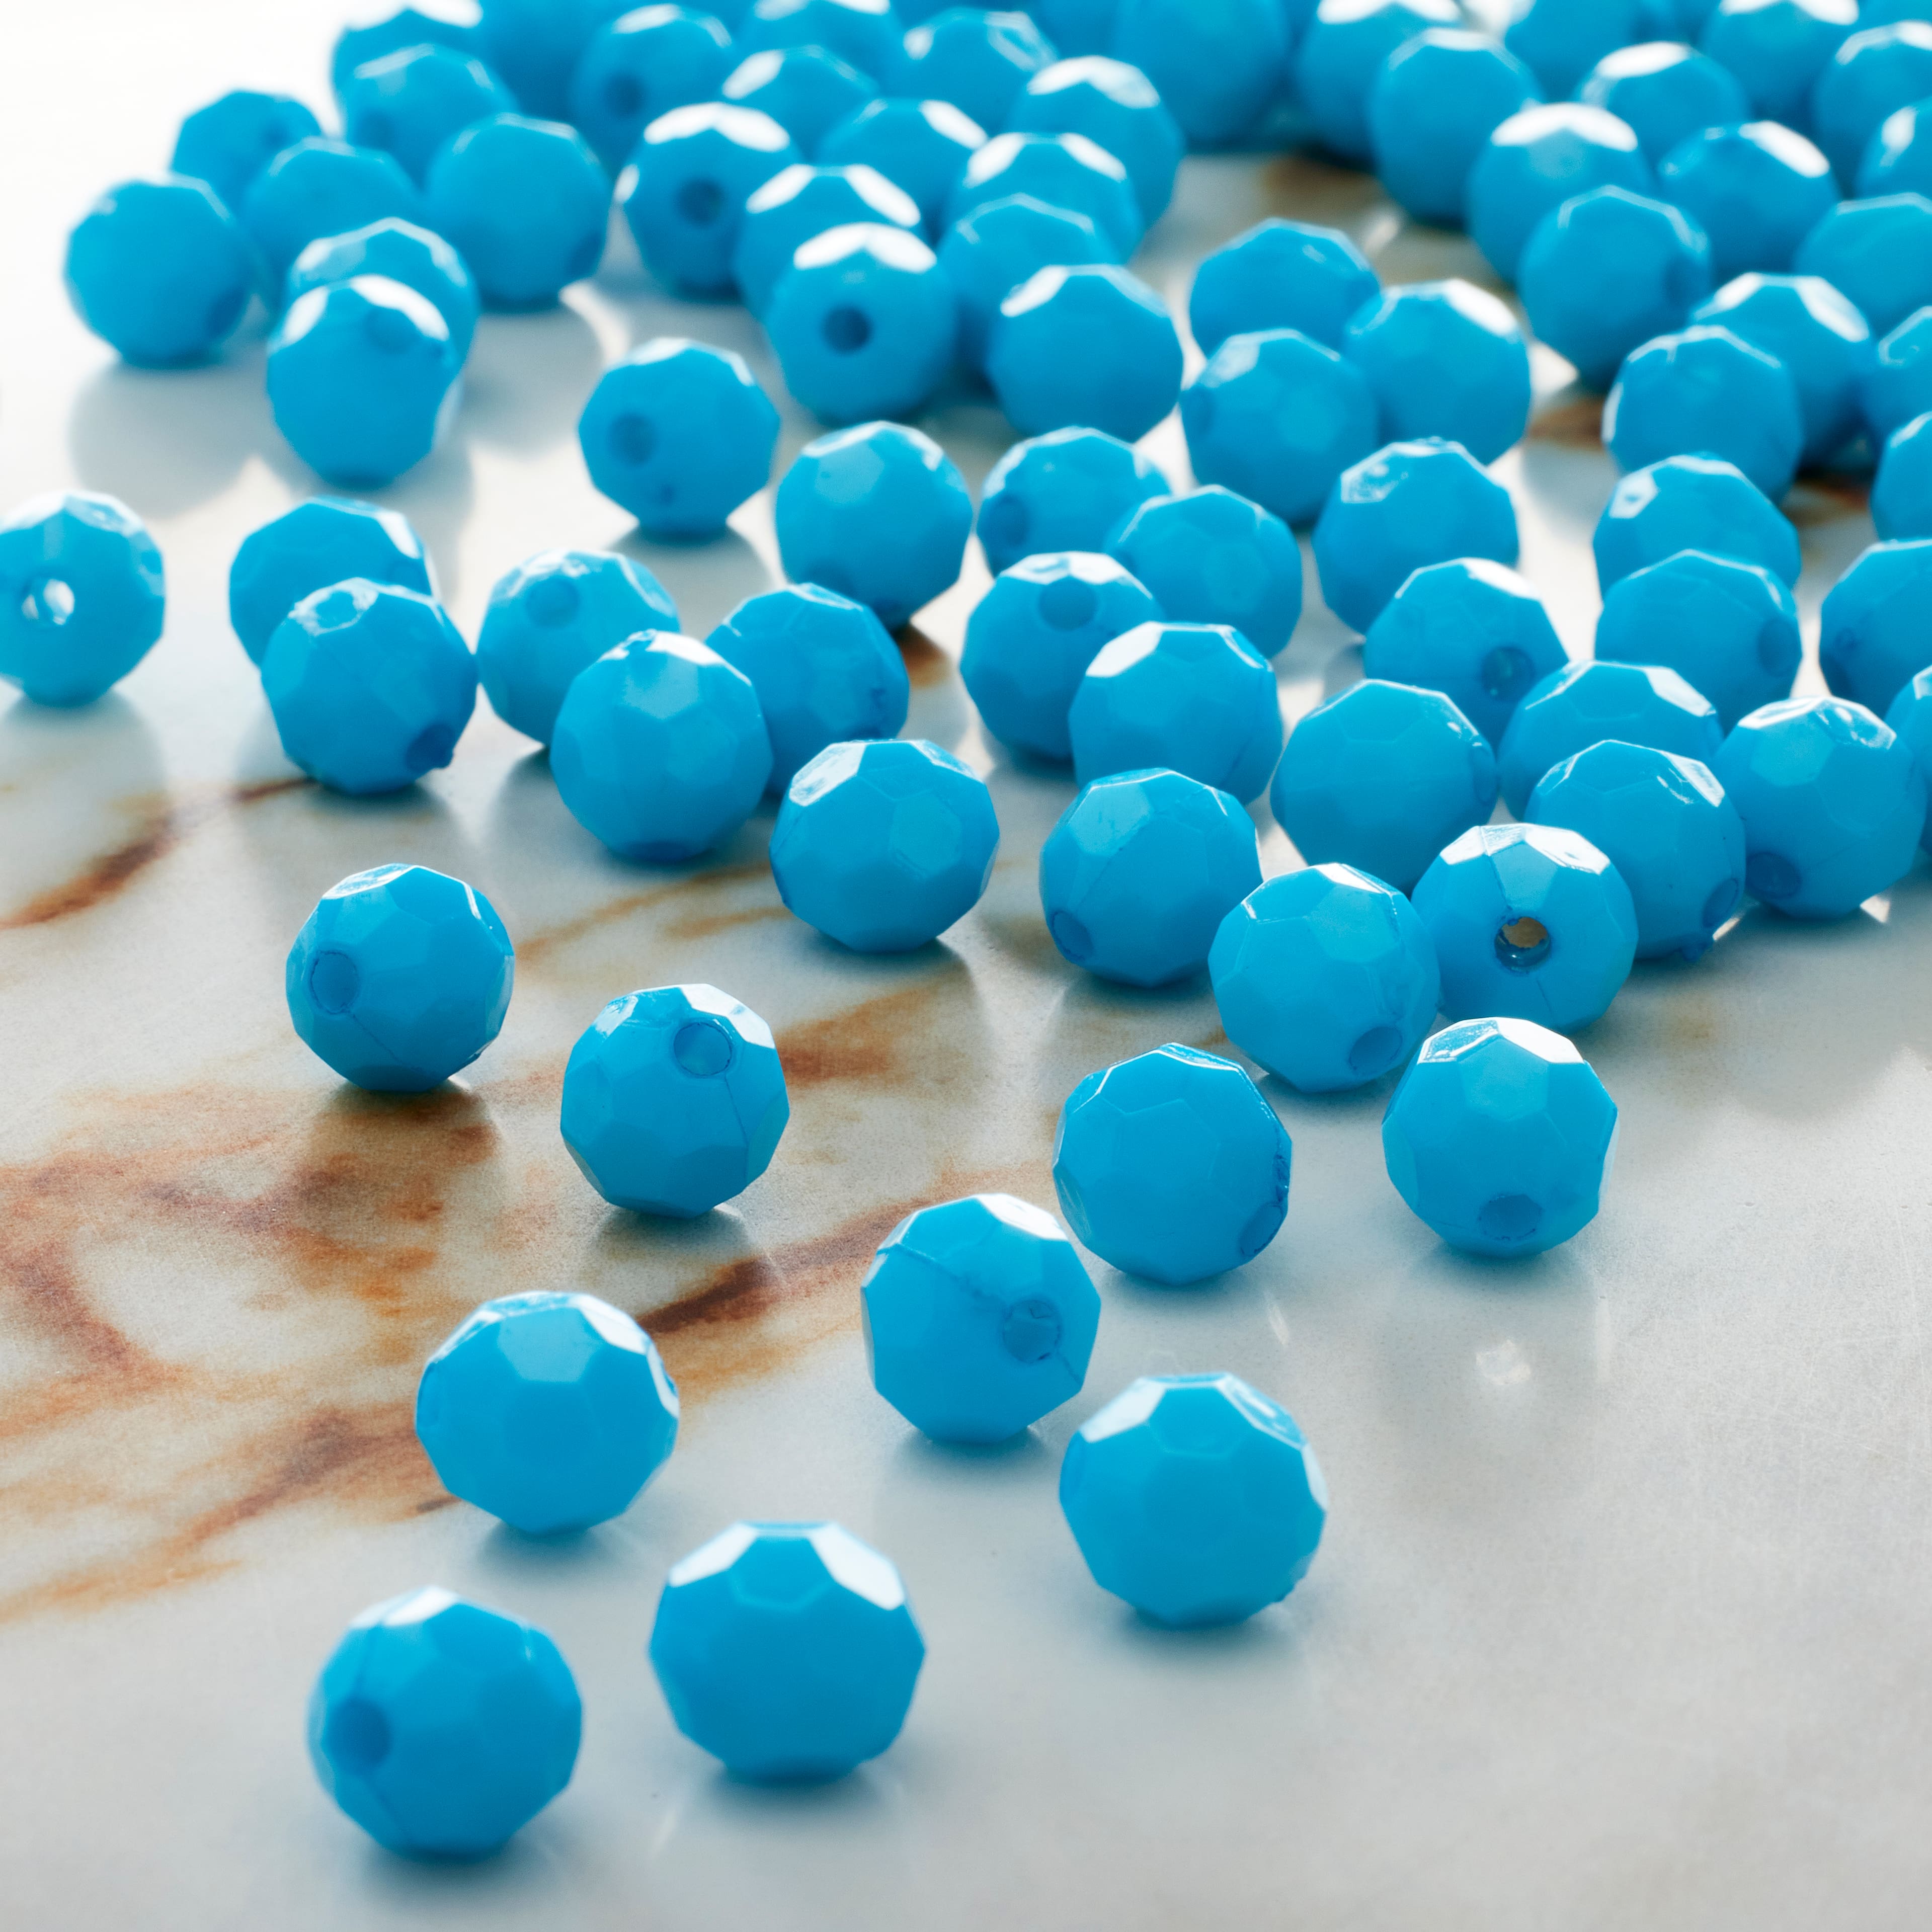 JOLLY STORE Crafts 8mm Faceted Beads Translucent Blue Turquoise Color,  500pcs